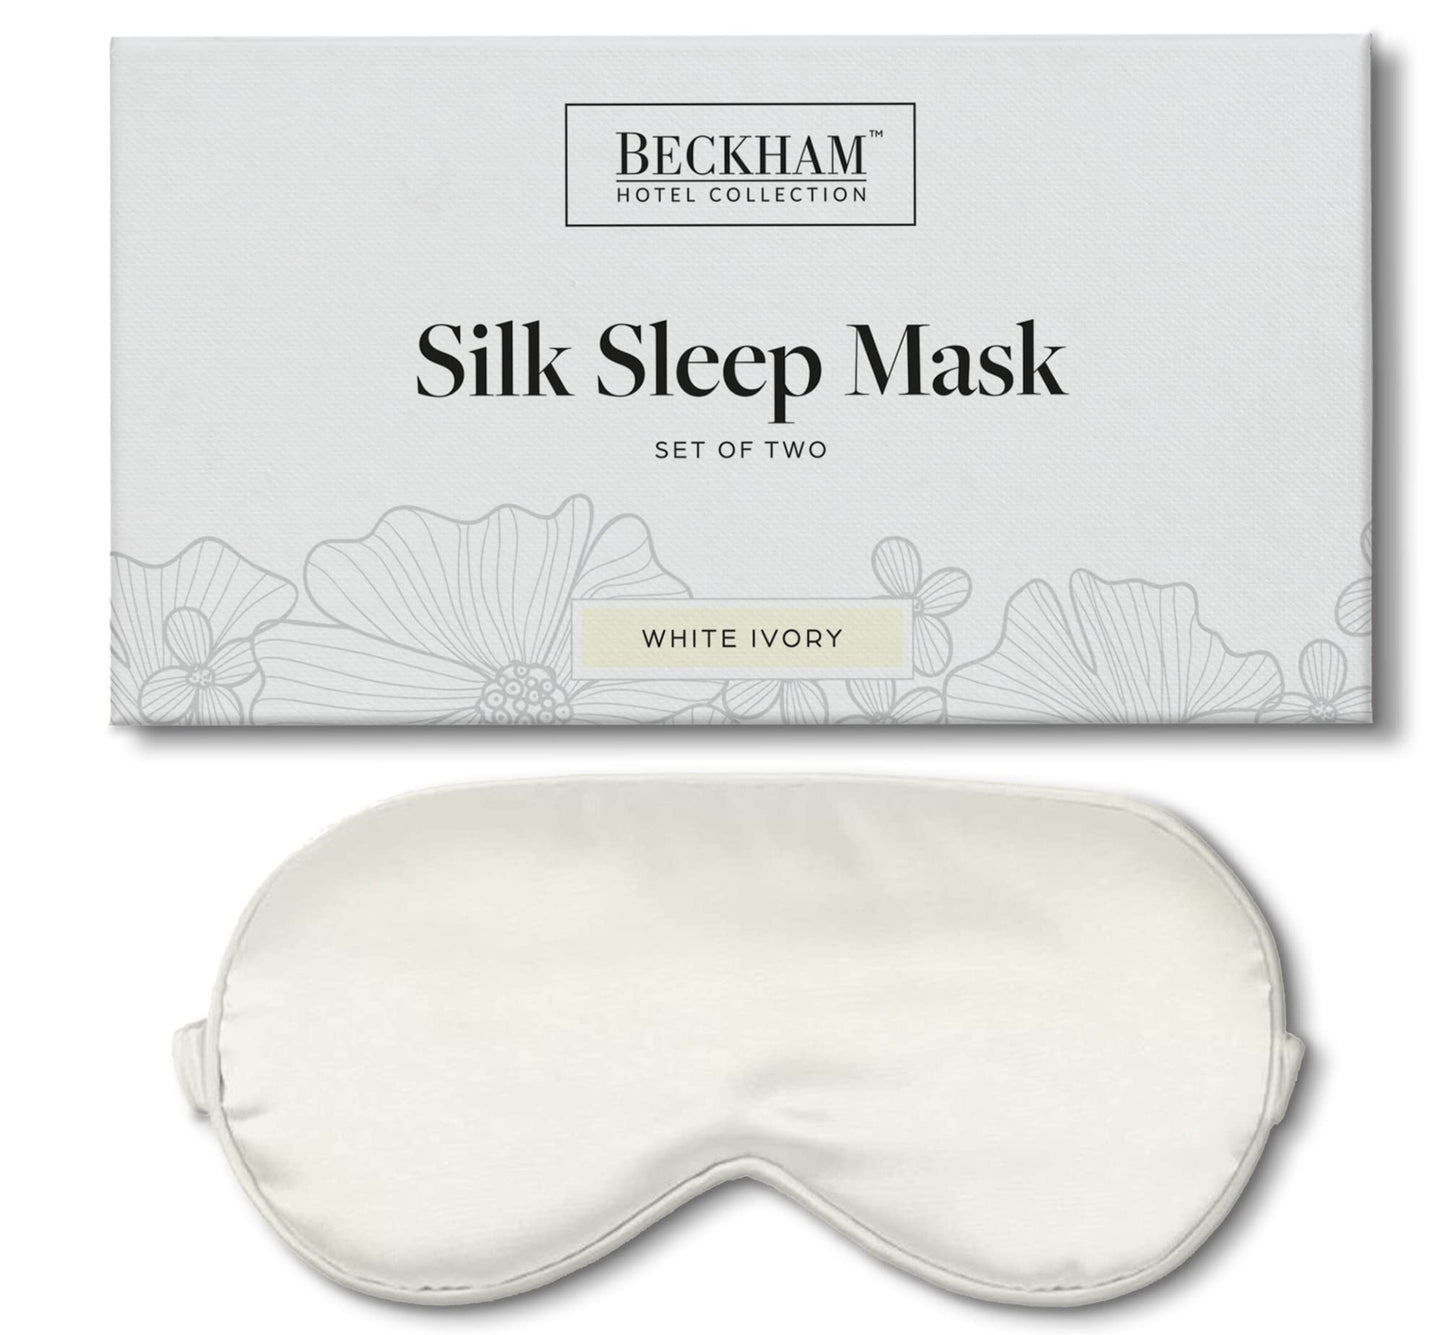 Beckham Hotel Collection Silk Sleep Mask - Pack of 2, 100% Mulberry Silk Sleeping Mask for Women and Men with Adjustable Strap - Blackout Eye Mask for Sleeping & Travel - White/Ivory